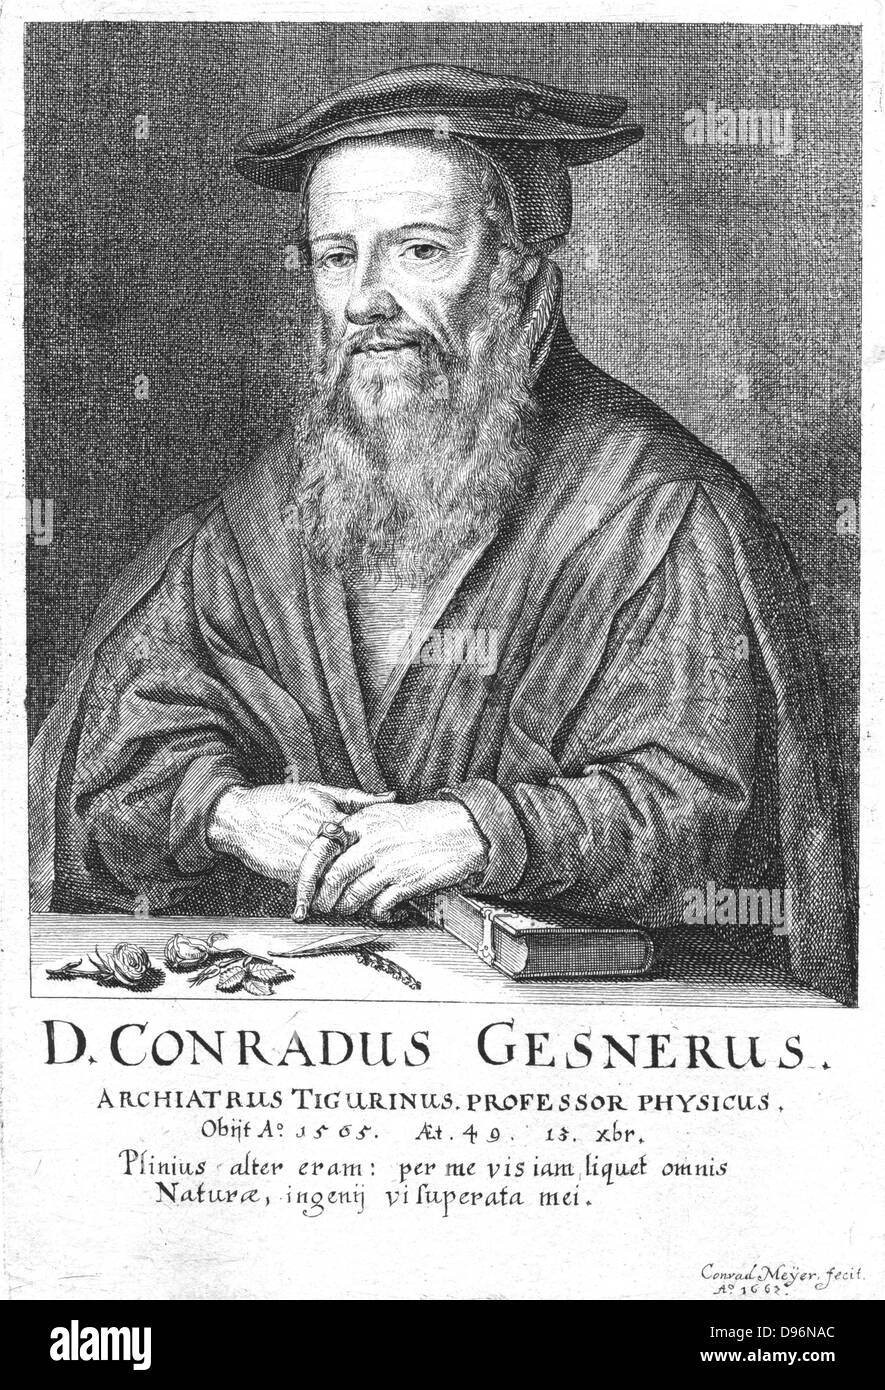 Conrad Gesner (1516-1565) Physician and naturalist. Practiced in Zurich until he died of plague. Engraving by Konrad Meyer (1618-1689) from a series of portraits of fellow citizens of Zurich. Stock Photo